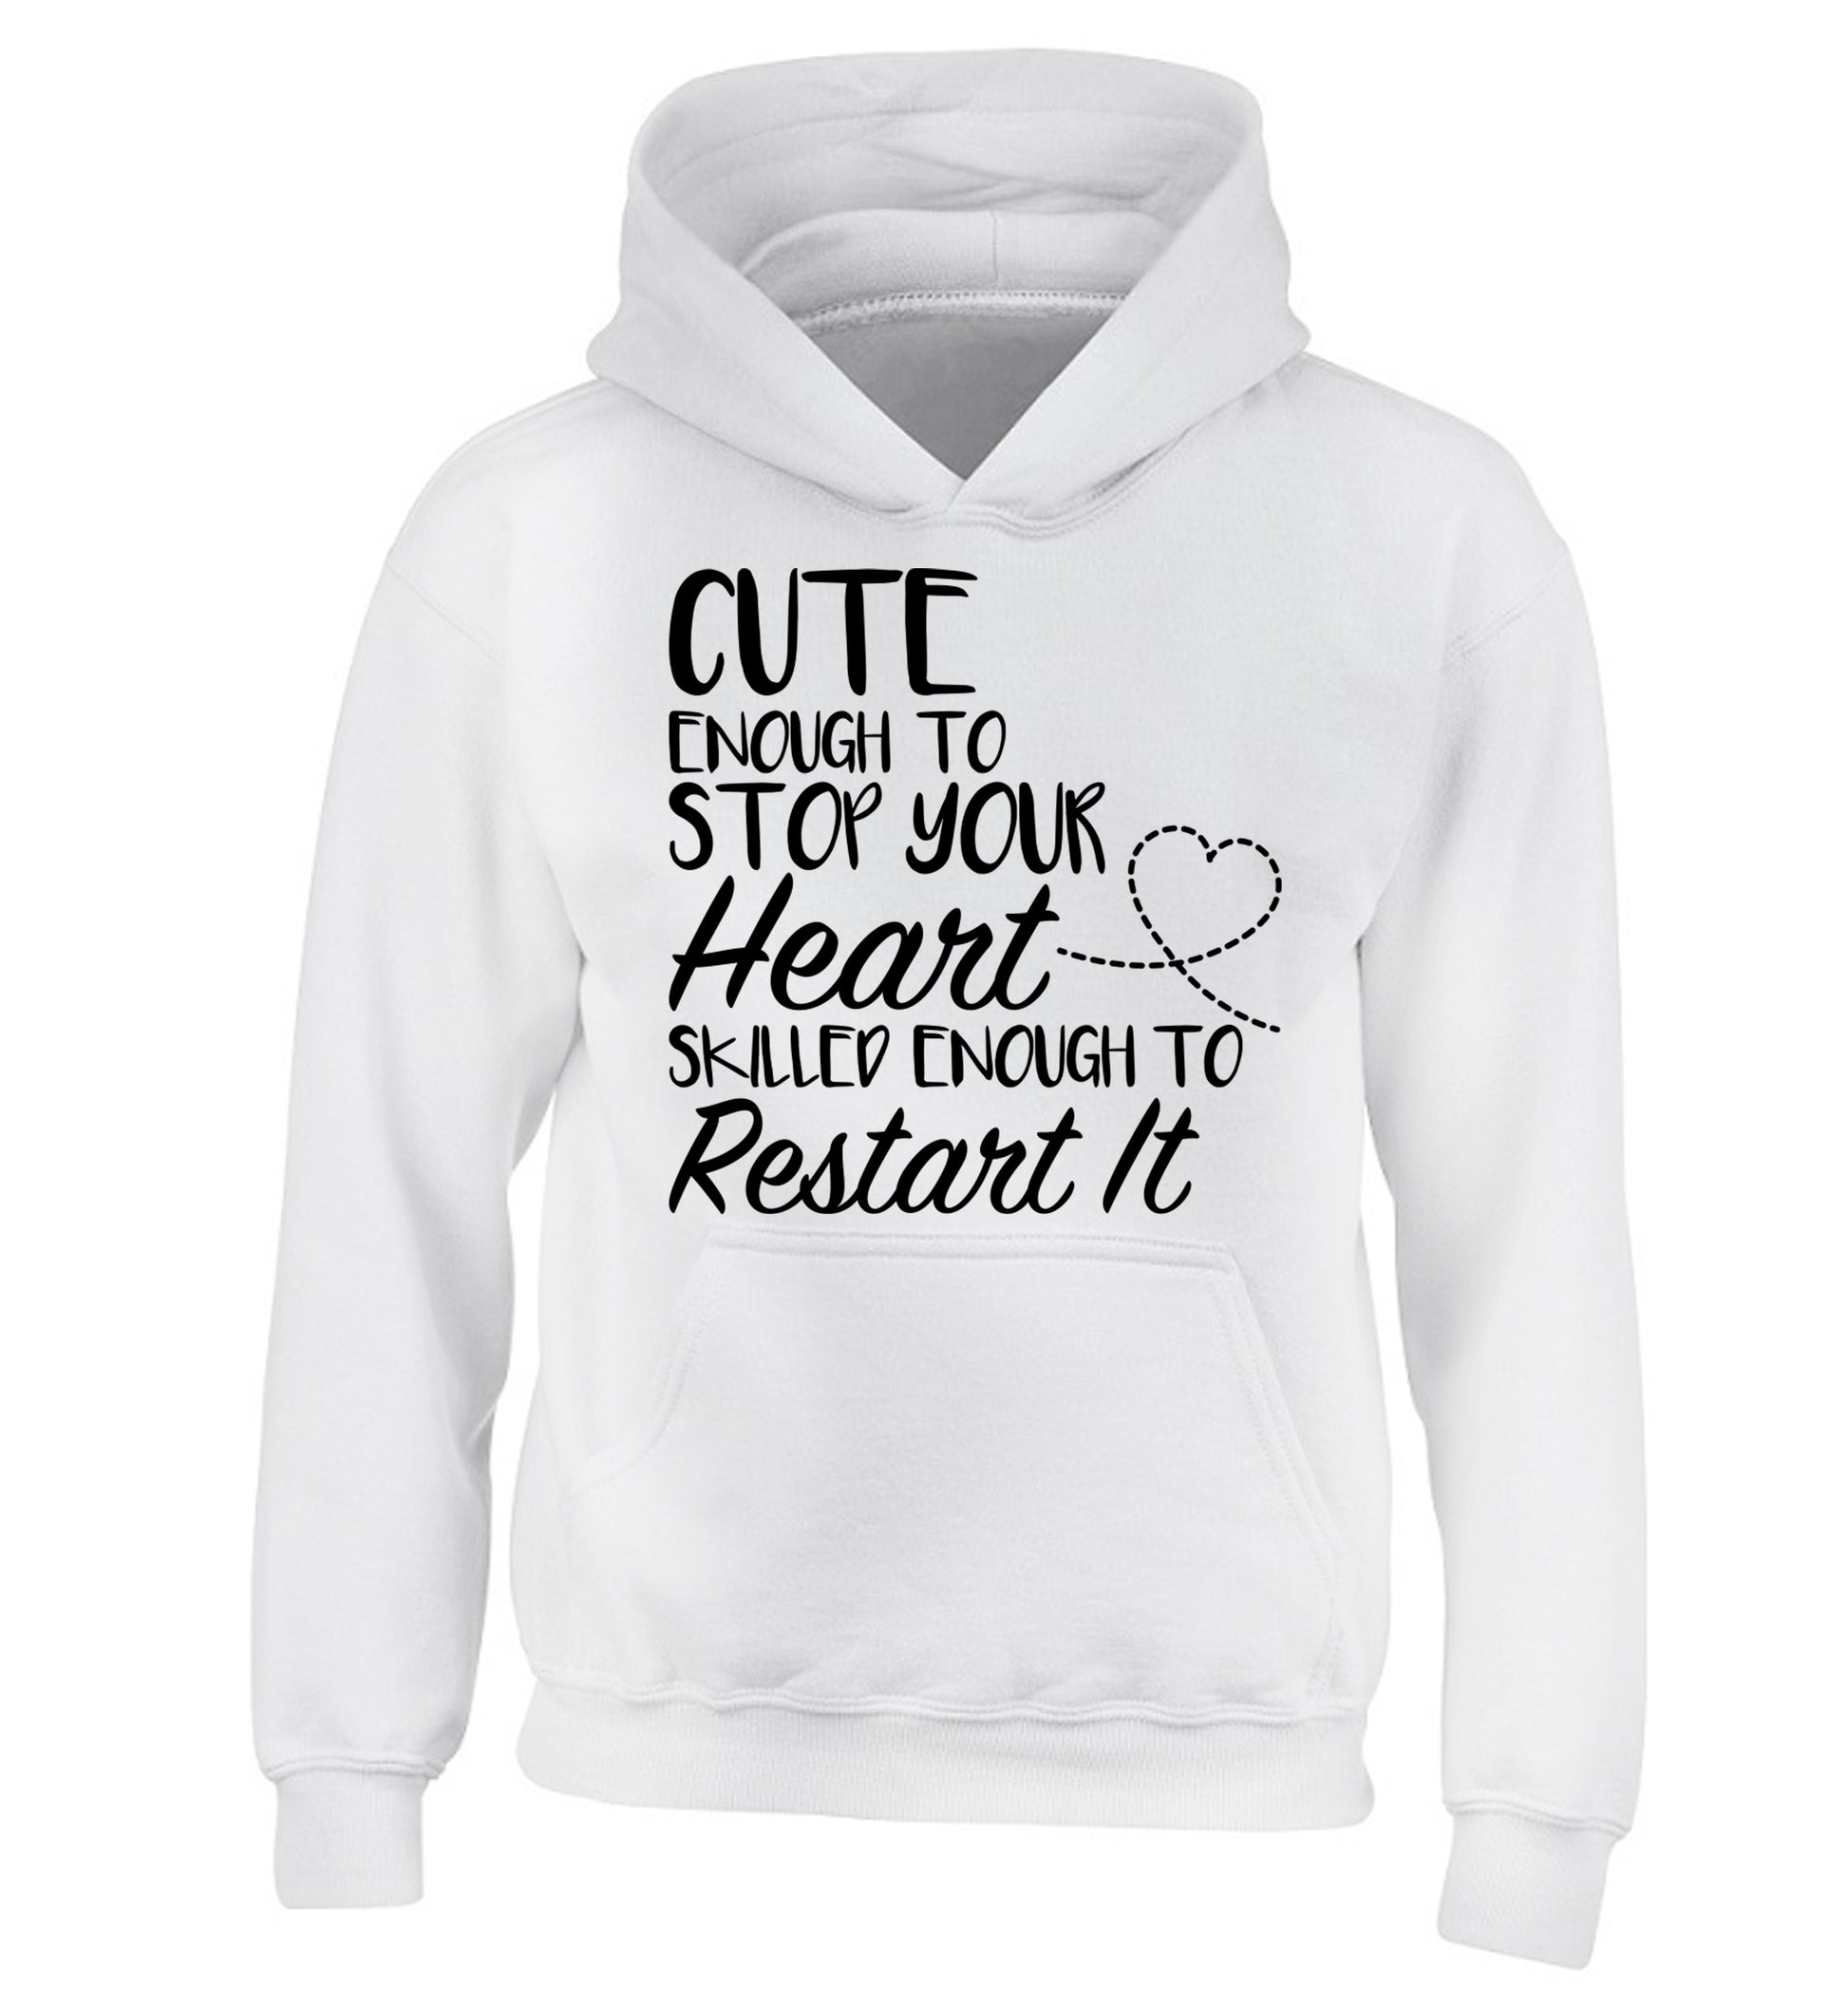 Cute enough to stop your heart skilled enough to restart it children's white hoodie 12-13 Years